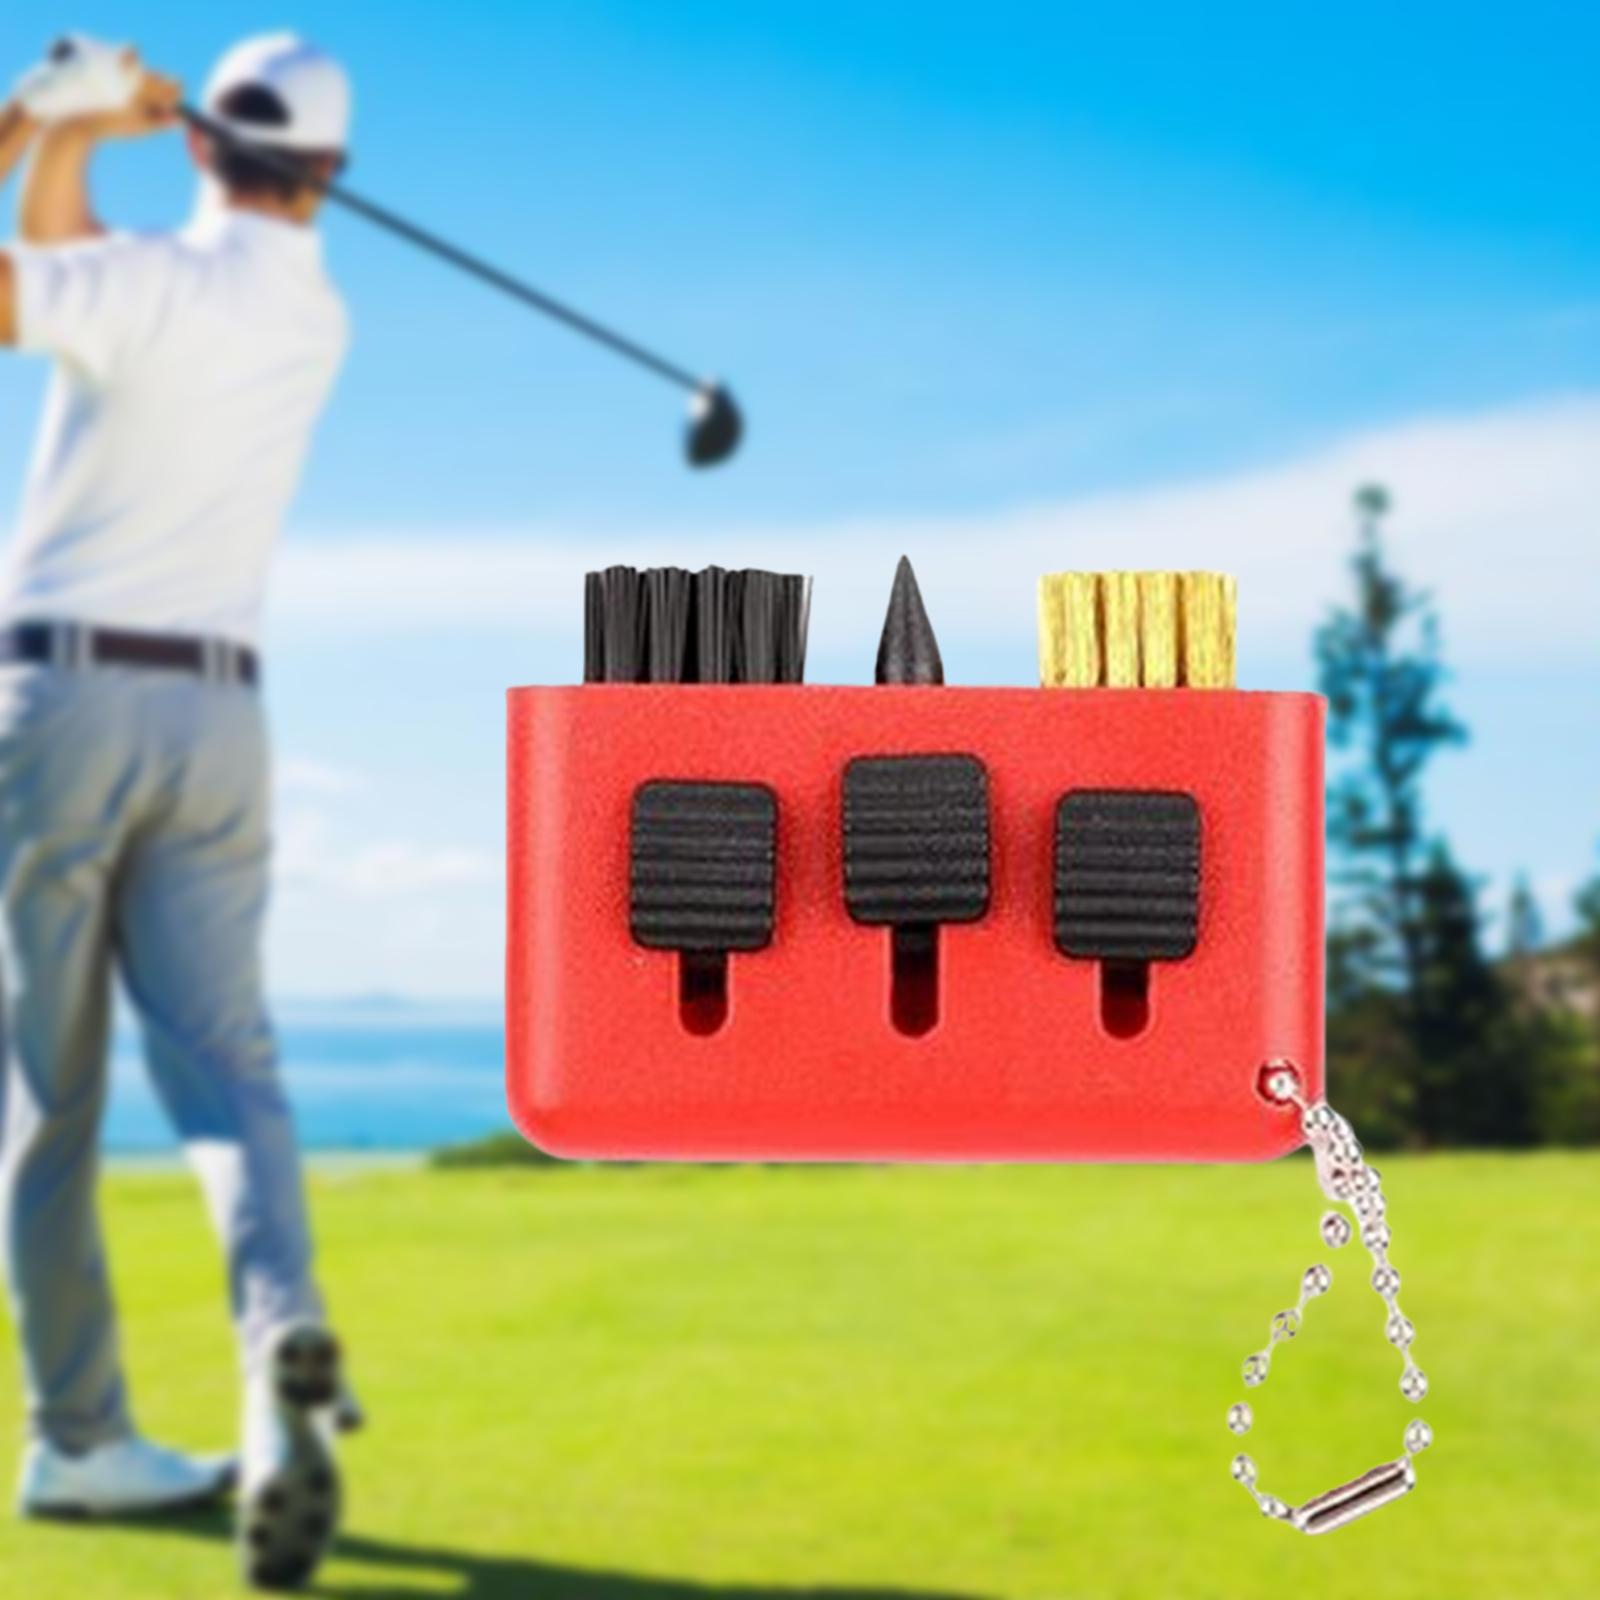 Golf Club Cleaning Brush Convenient Carrying for Golf Club Maintenance, Tool Red